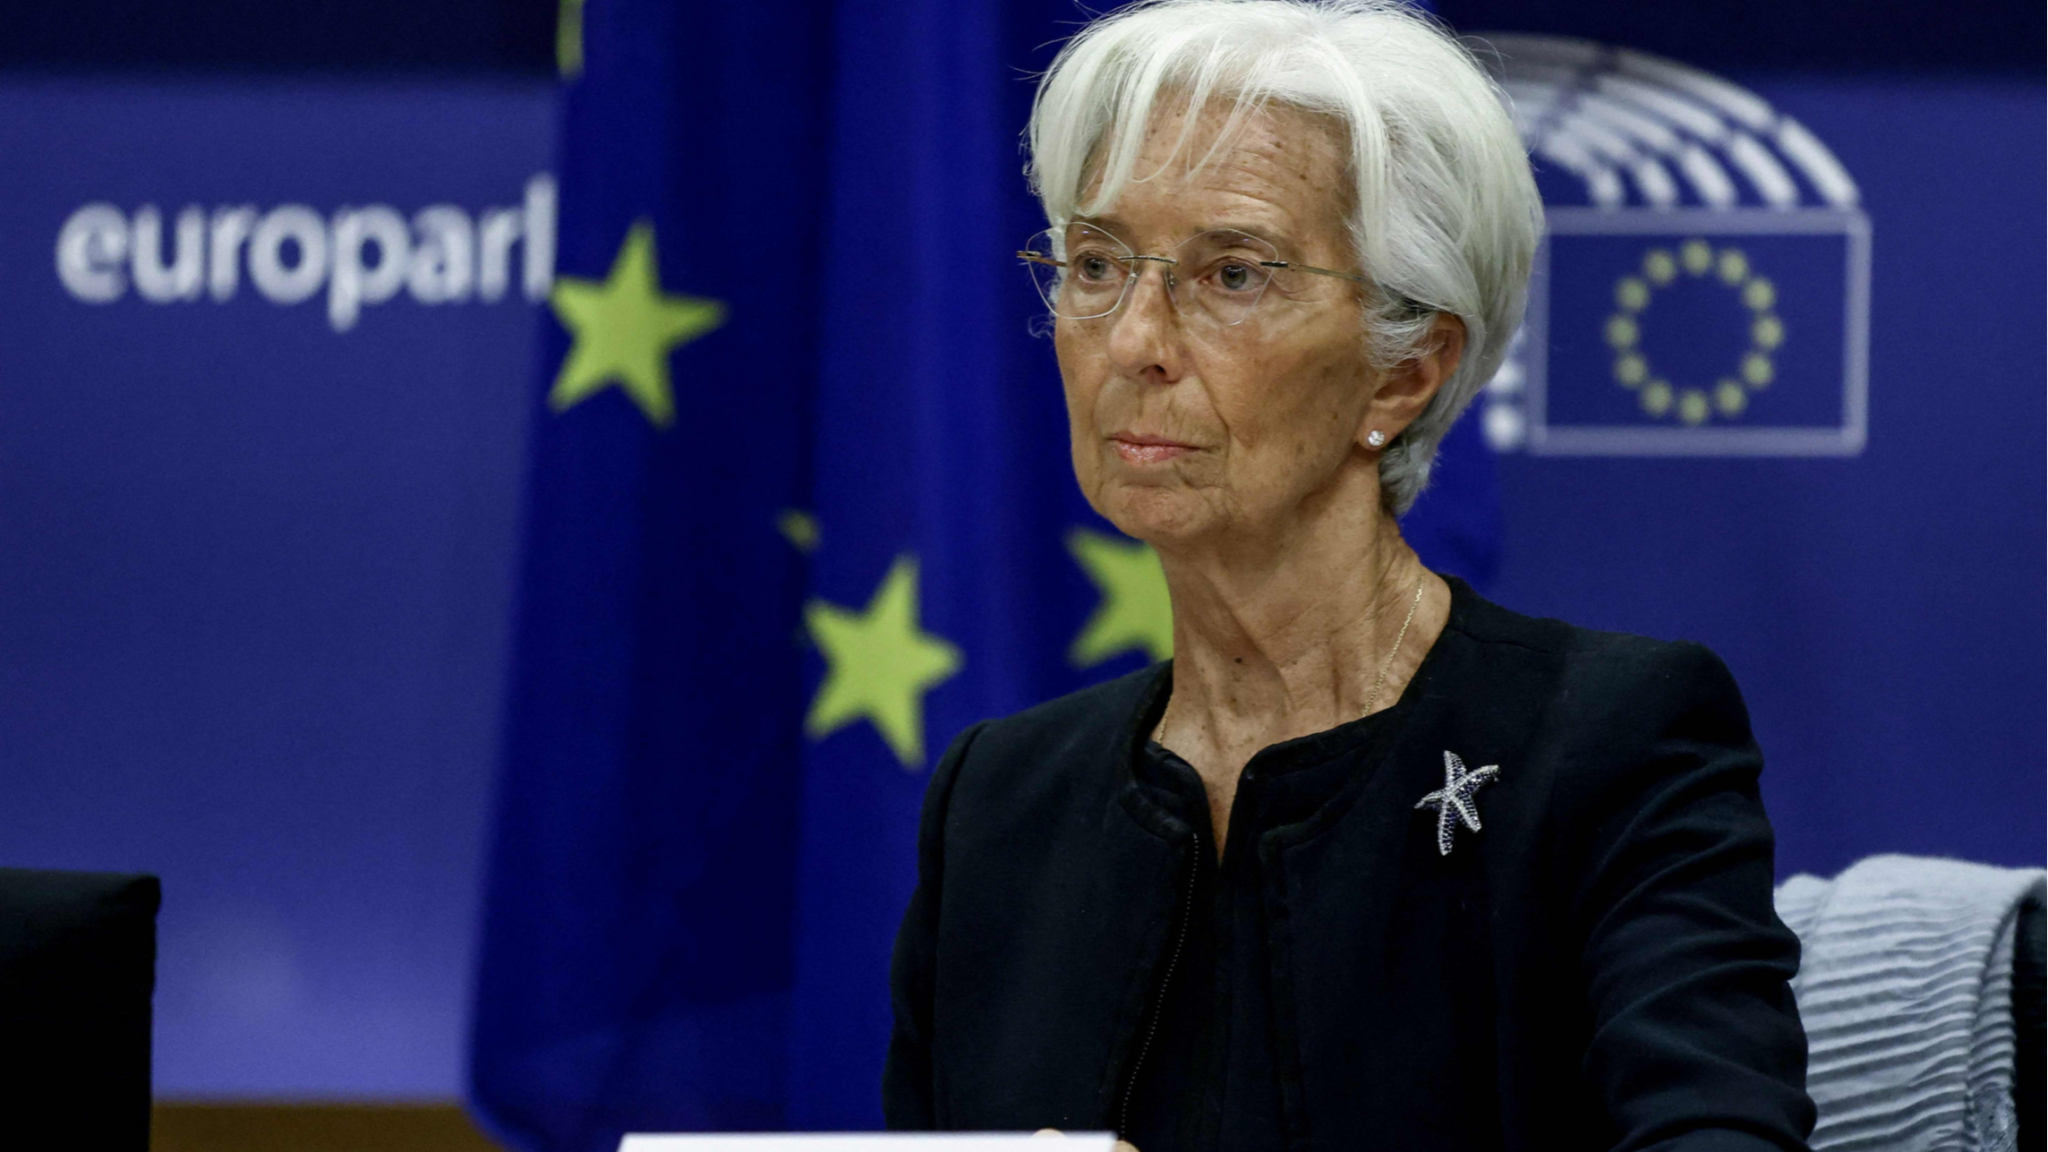 Live news updates: Lagarde says ECB plans several rate rises to reach ‘neutral’ level